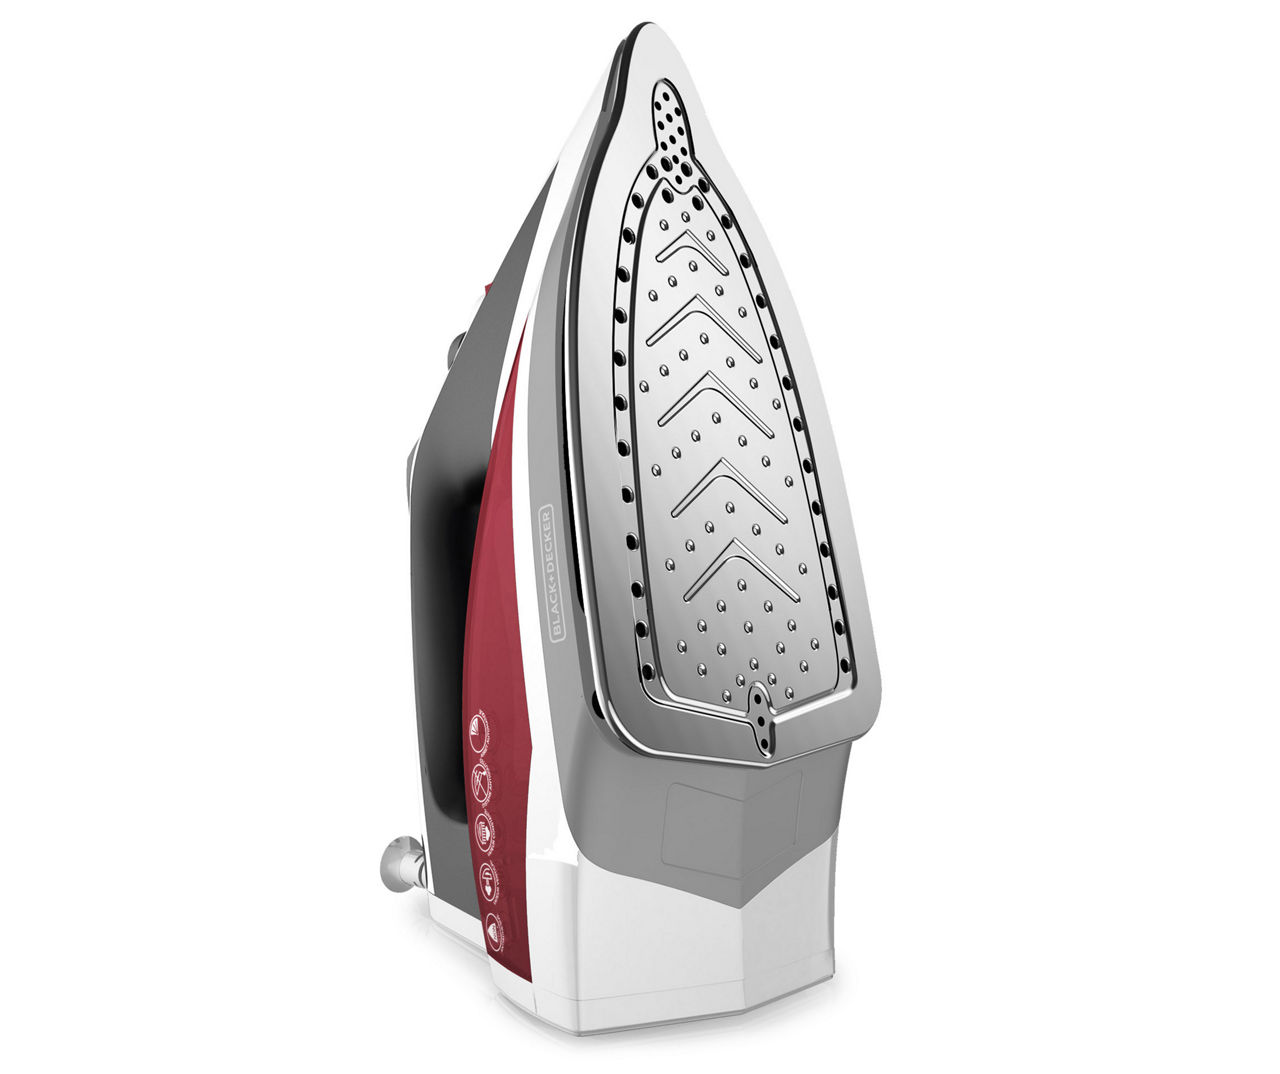 Black+Decker advanced steam iron is on sale for just $19.99 at Walmart